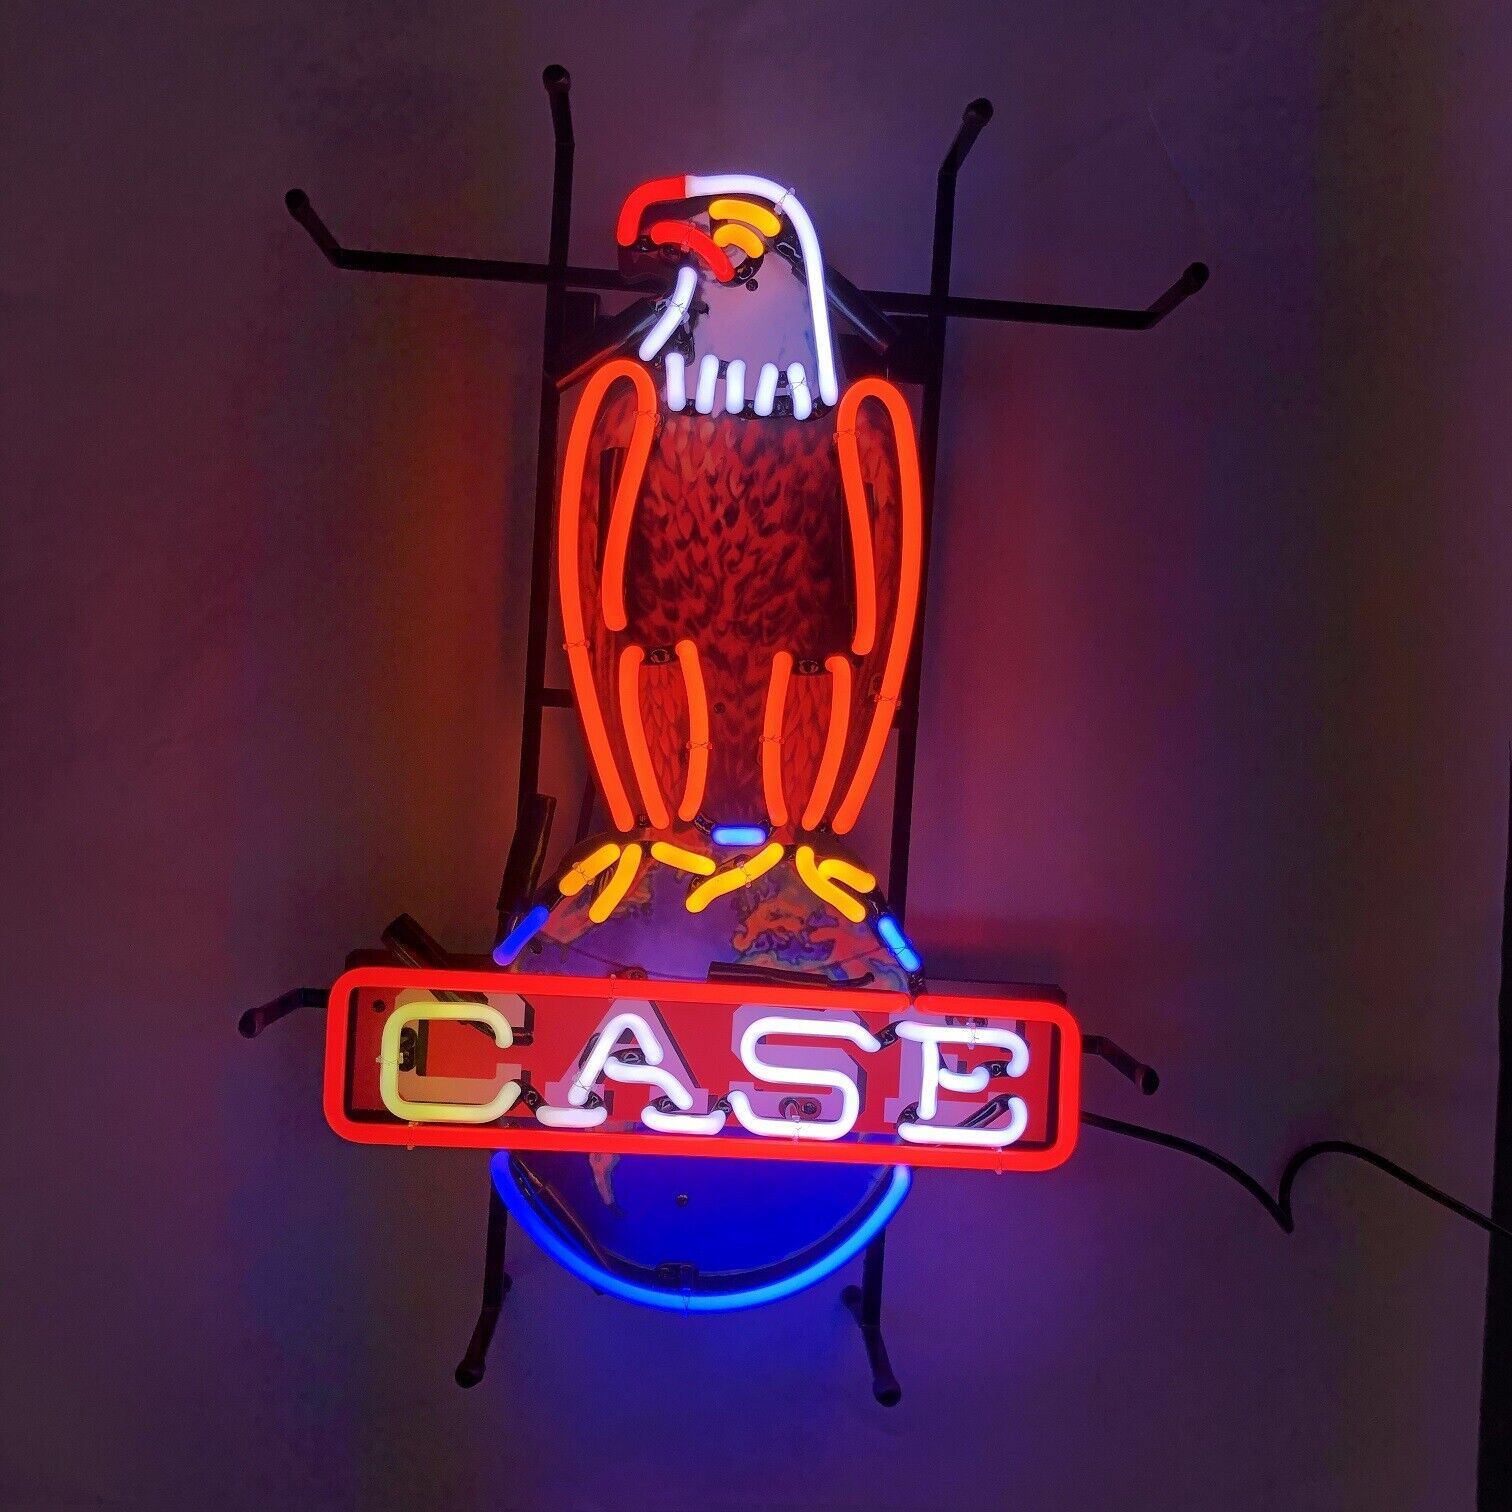 Case Eagle Farm Equipment Lamp Neon Light Sign With HD Vivid Printing 24\